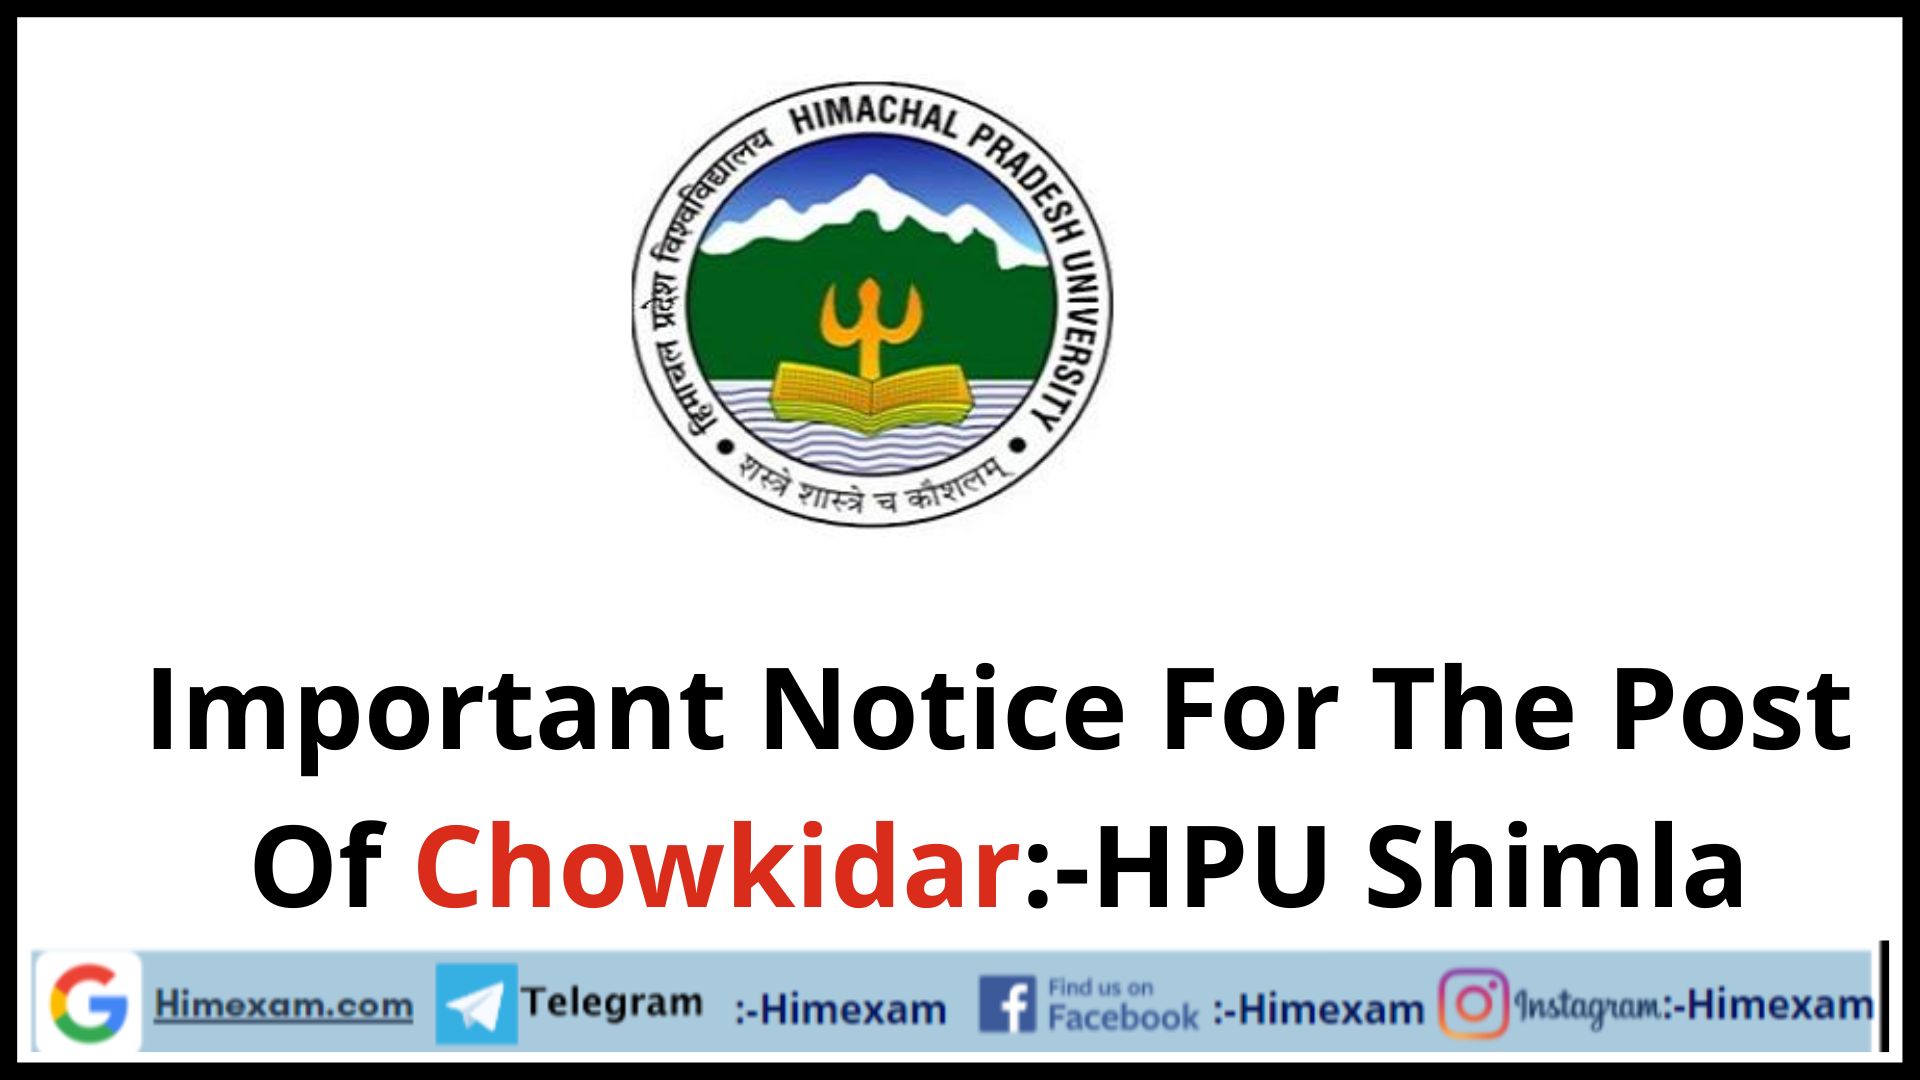 Important Notice For The Post Of Chowkidar:-HPU Shimla